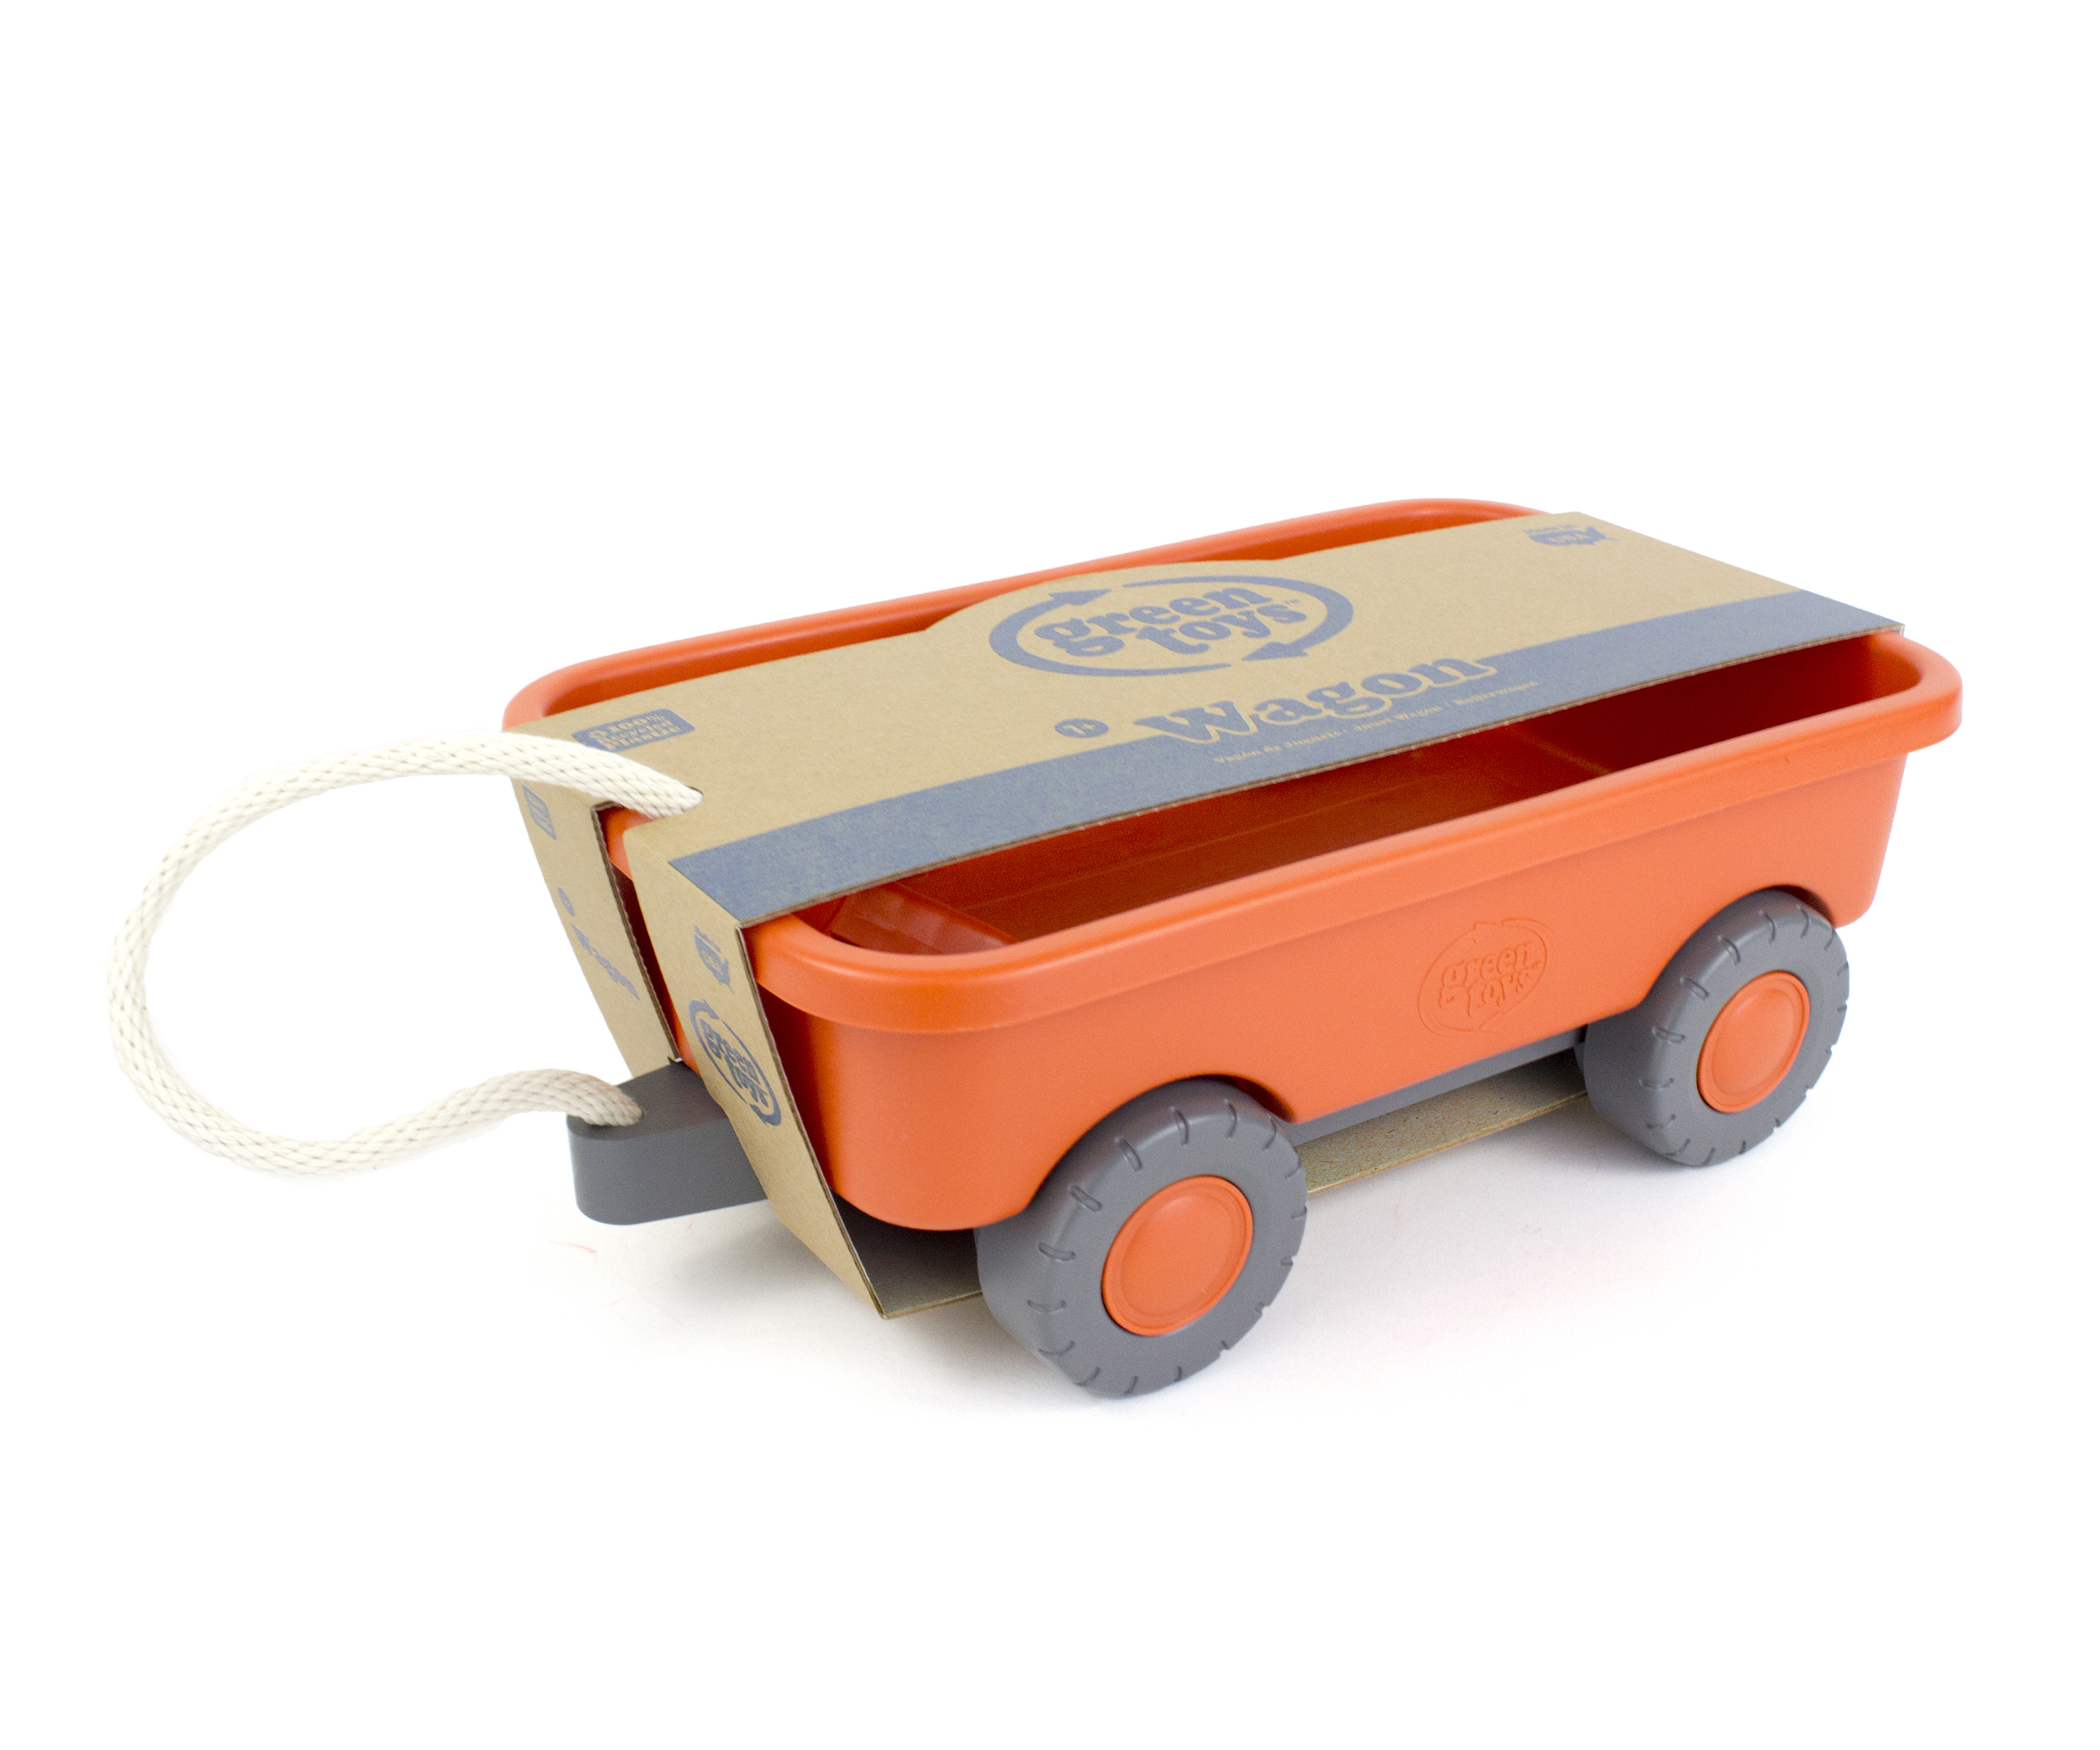 Green Toys Wagon Indoor/Outdoor Toy Orange - image 2 of 2